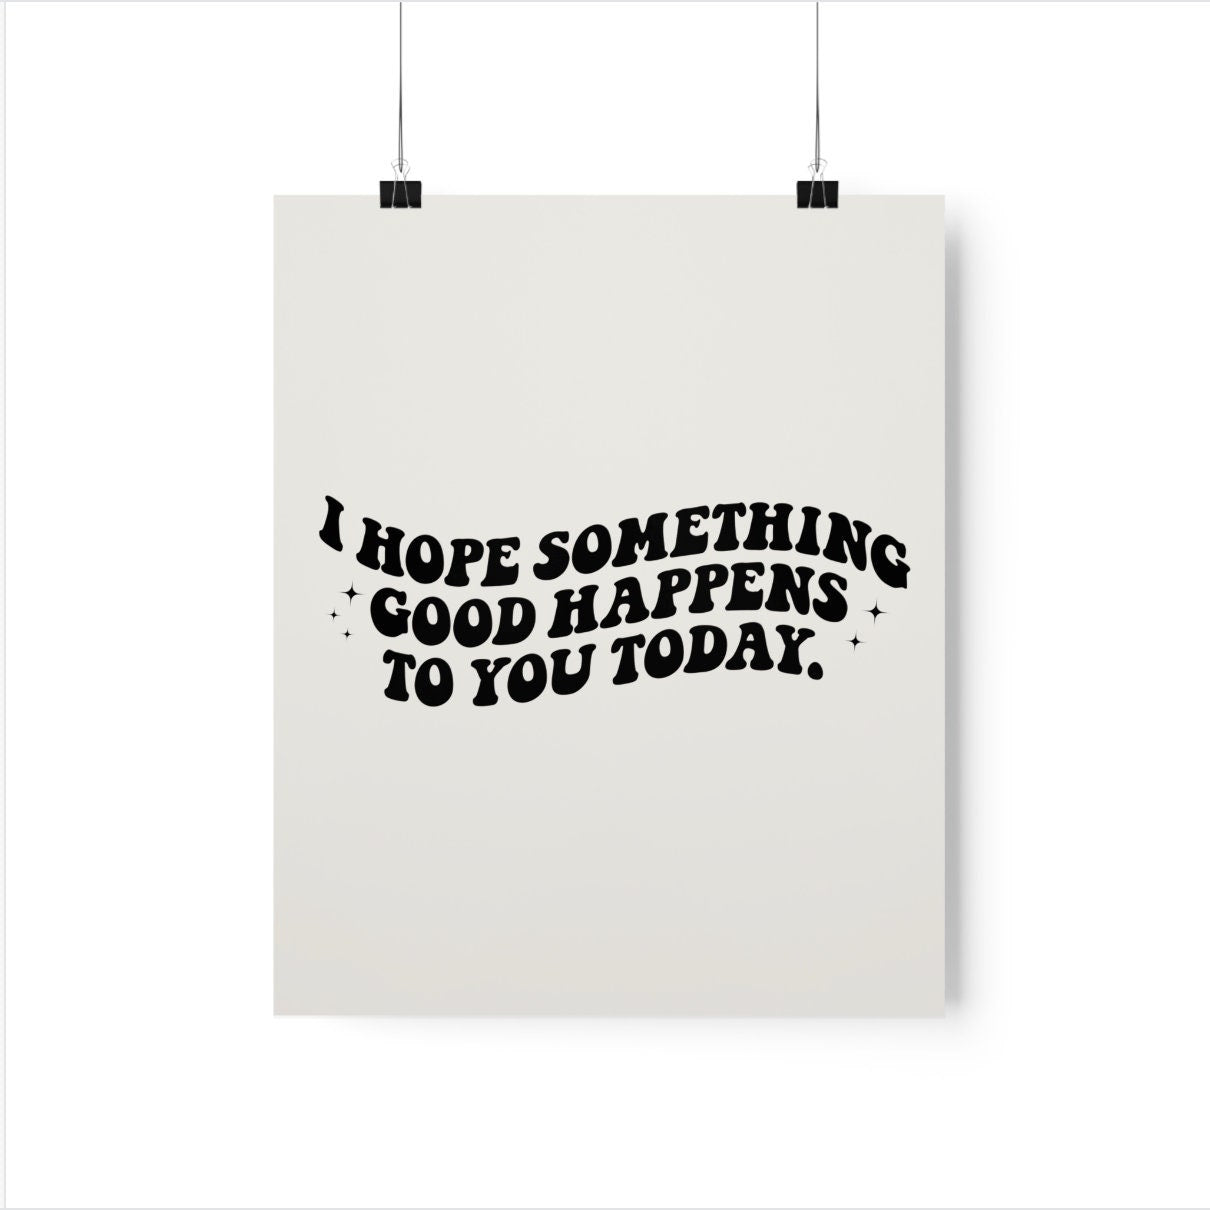 I Hope Something Good Happens To You Today Posters, Beauty Salon Decor, Positive Wall Art, 7 Size Options, Premium Posters, Positive Posters